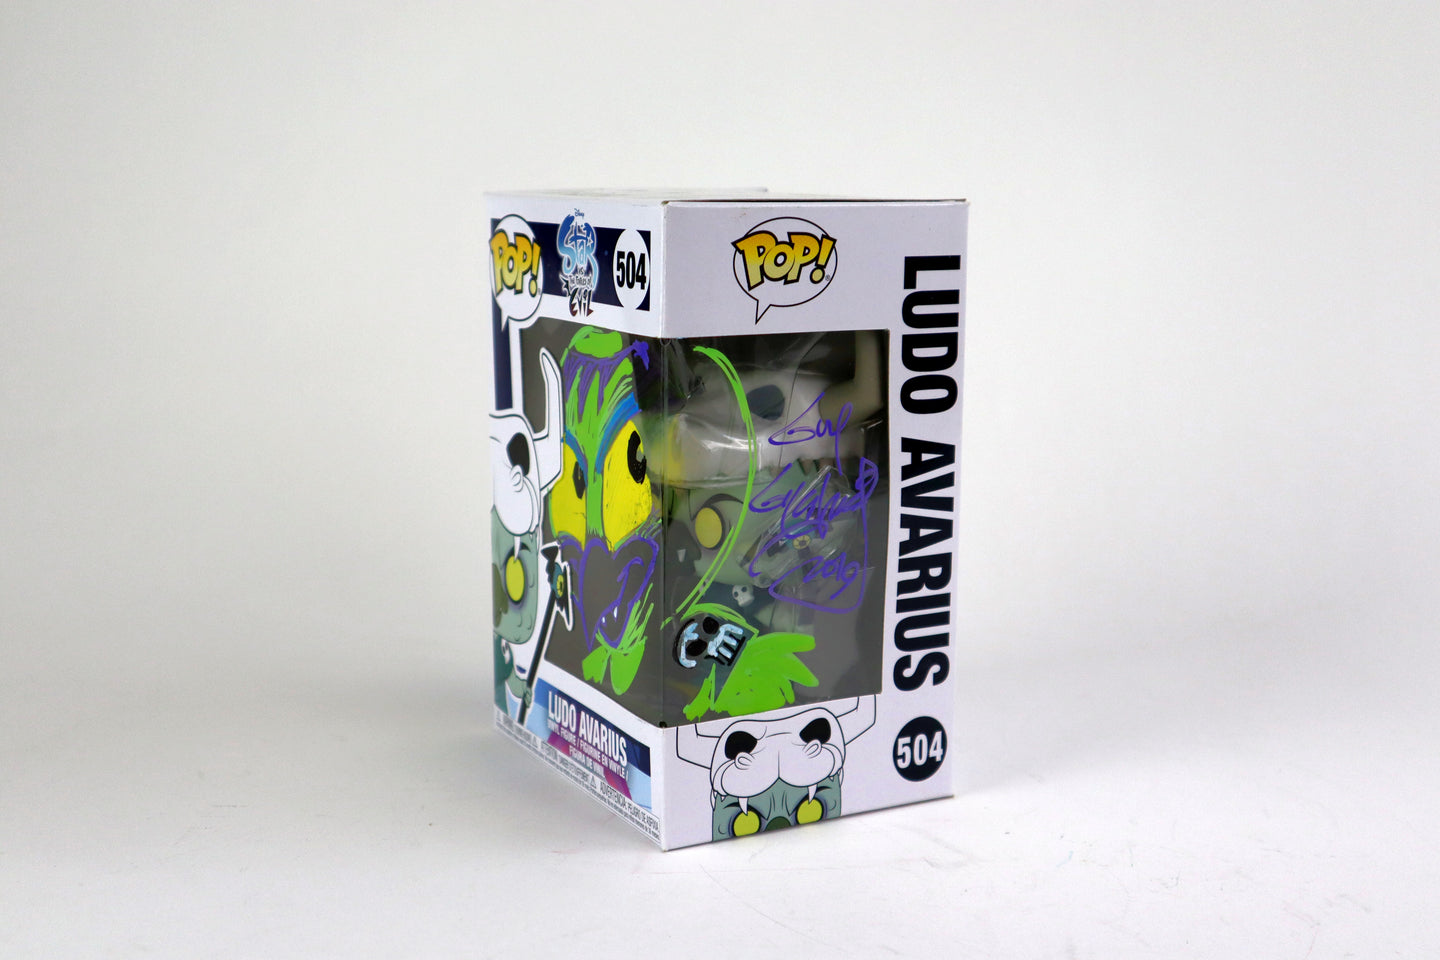 Disney Star vs The Forces of Evil Remark Funko POP Ludo Avarius #504 - Signed by Guy Gilchrist